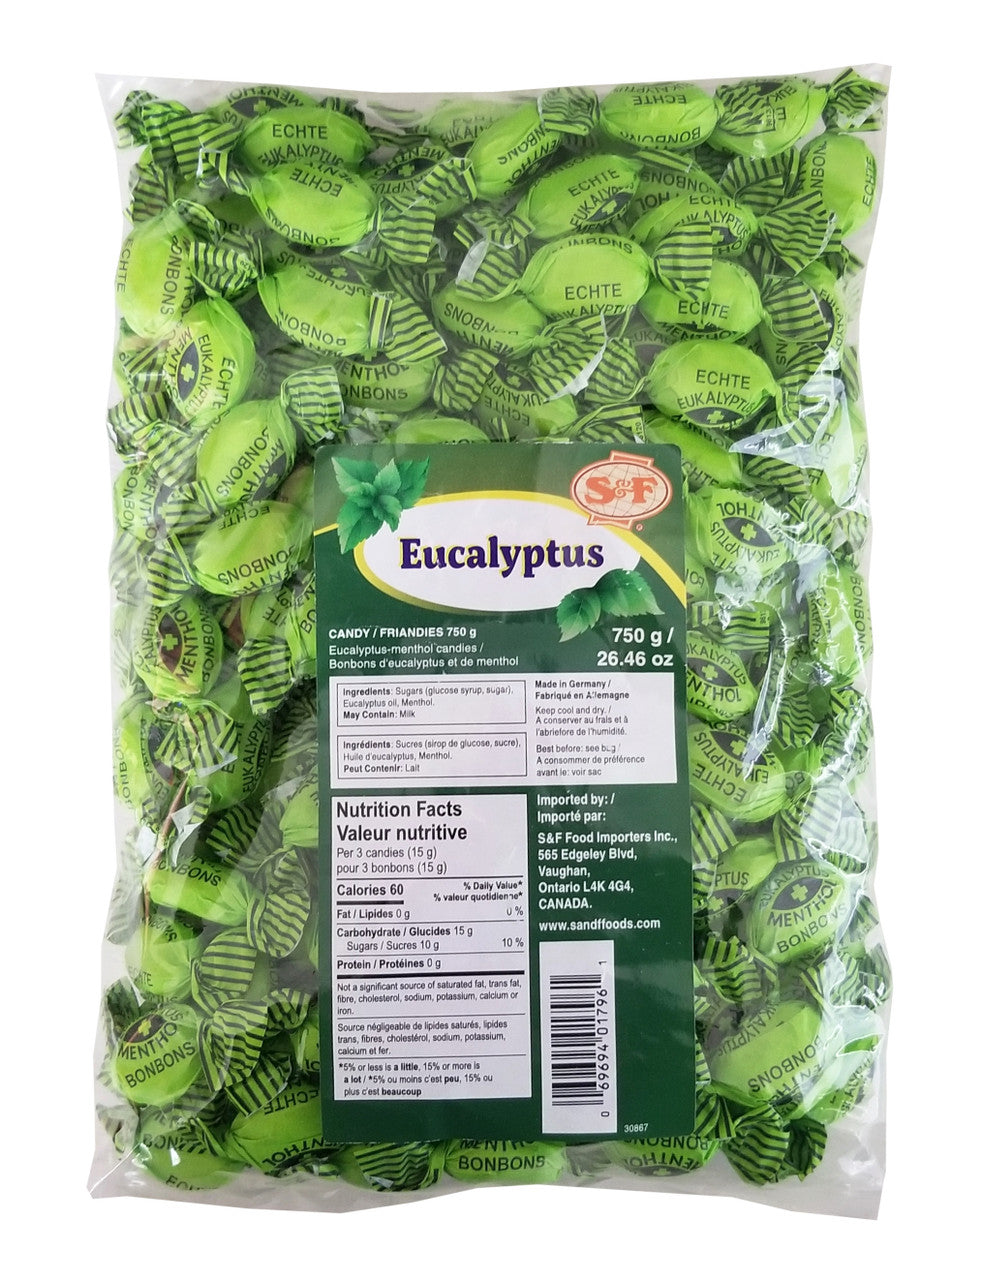 S&F Eucalyptus Candies, 750g/26.46 oz. Bag {Imported from Canada}